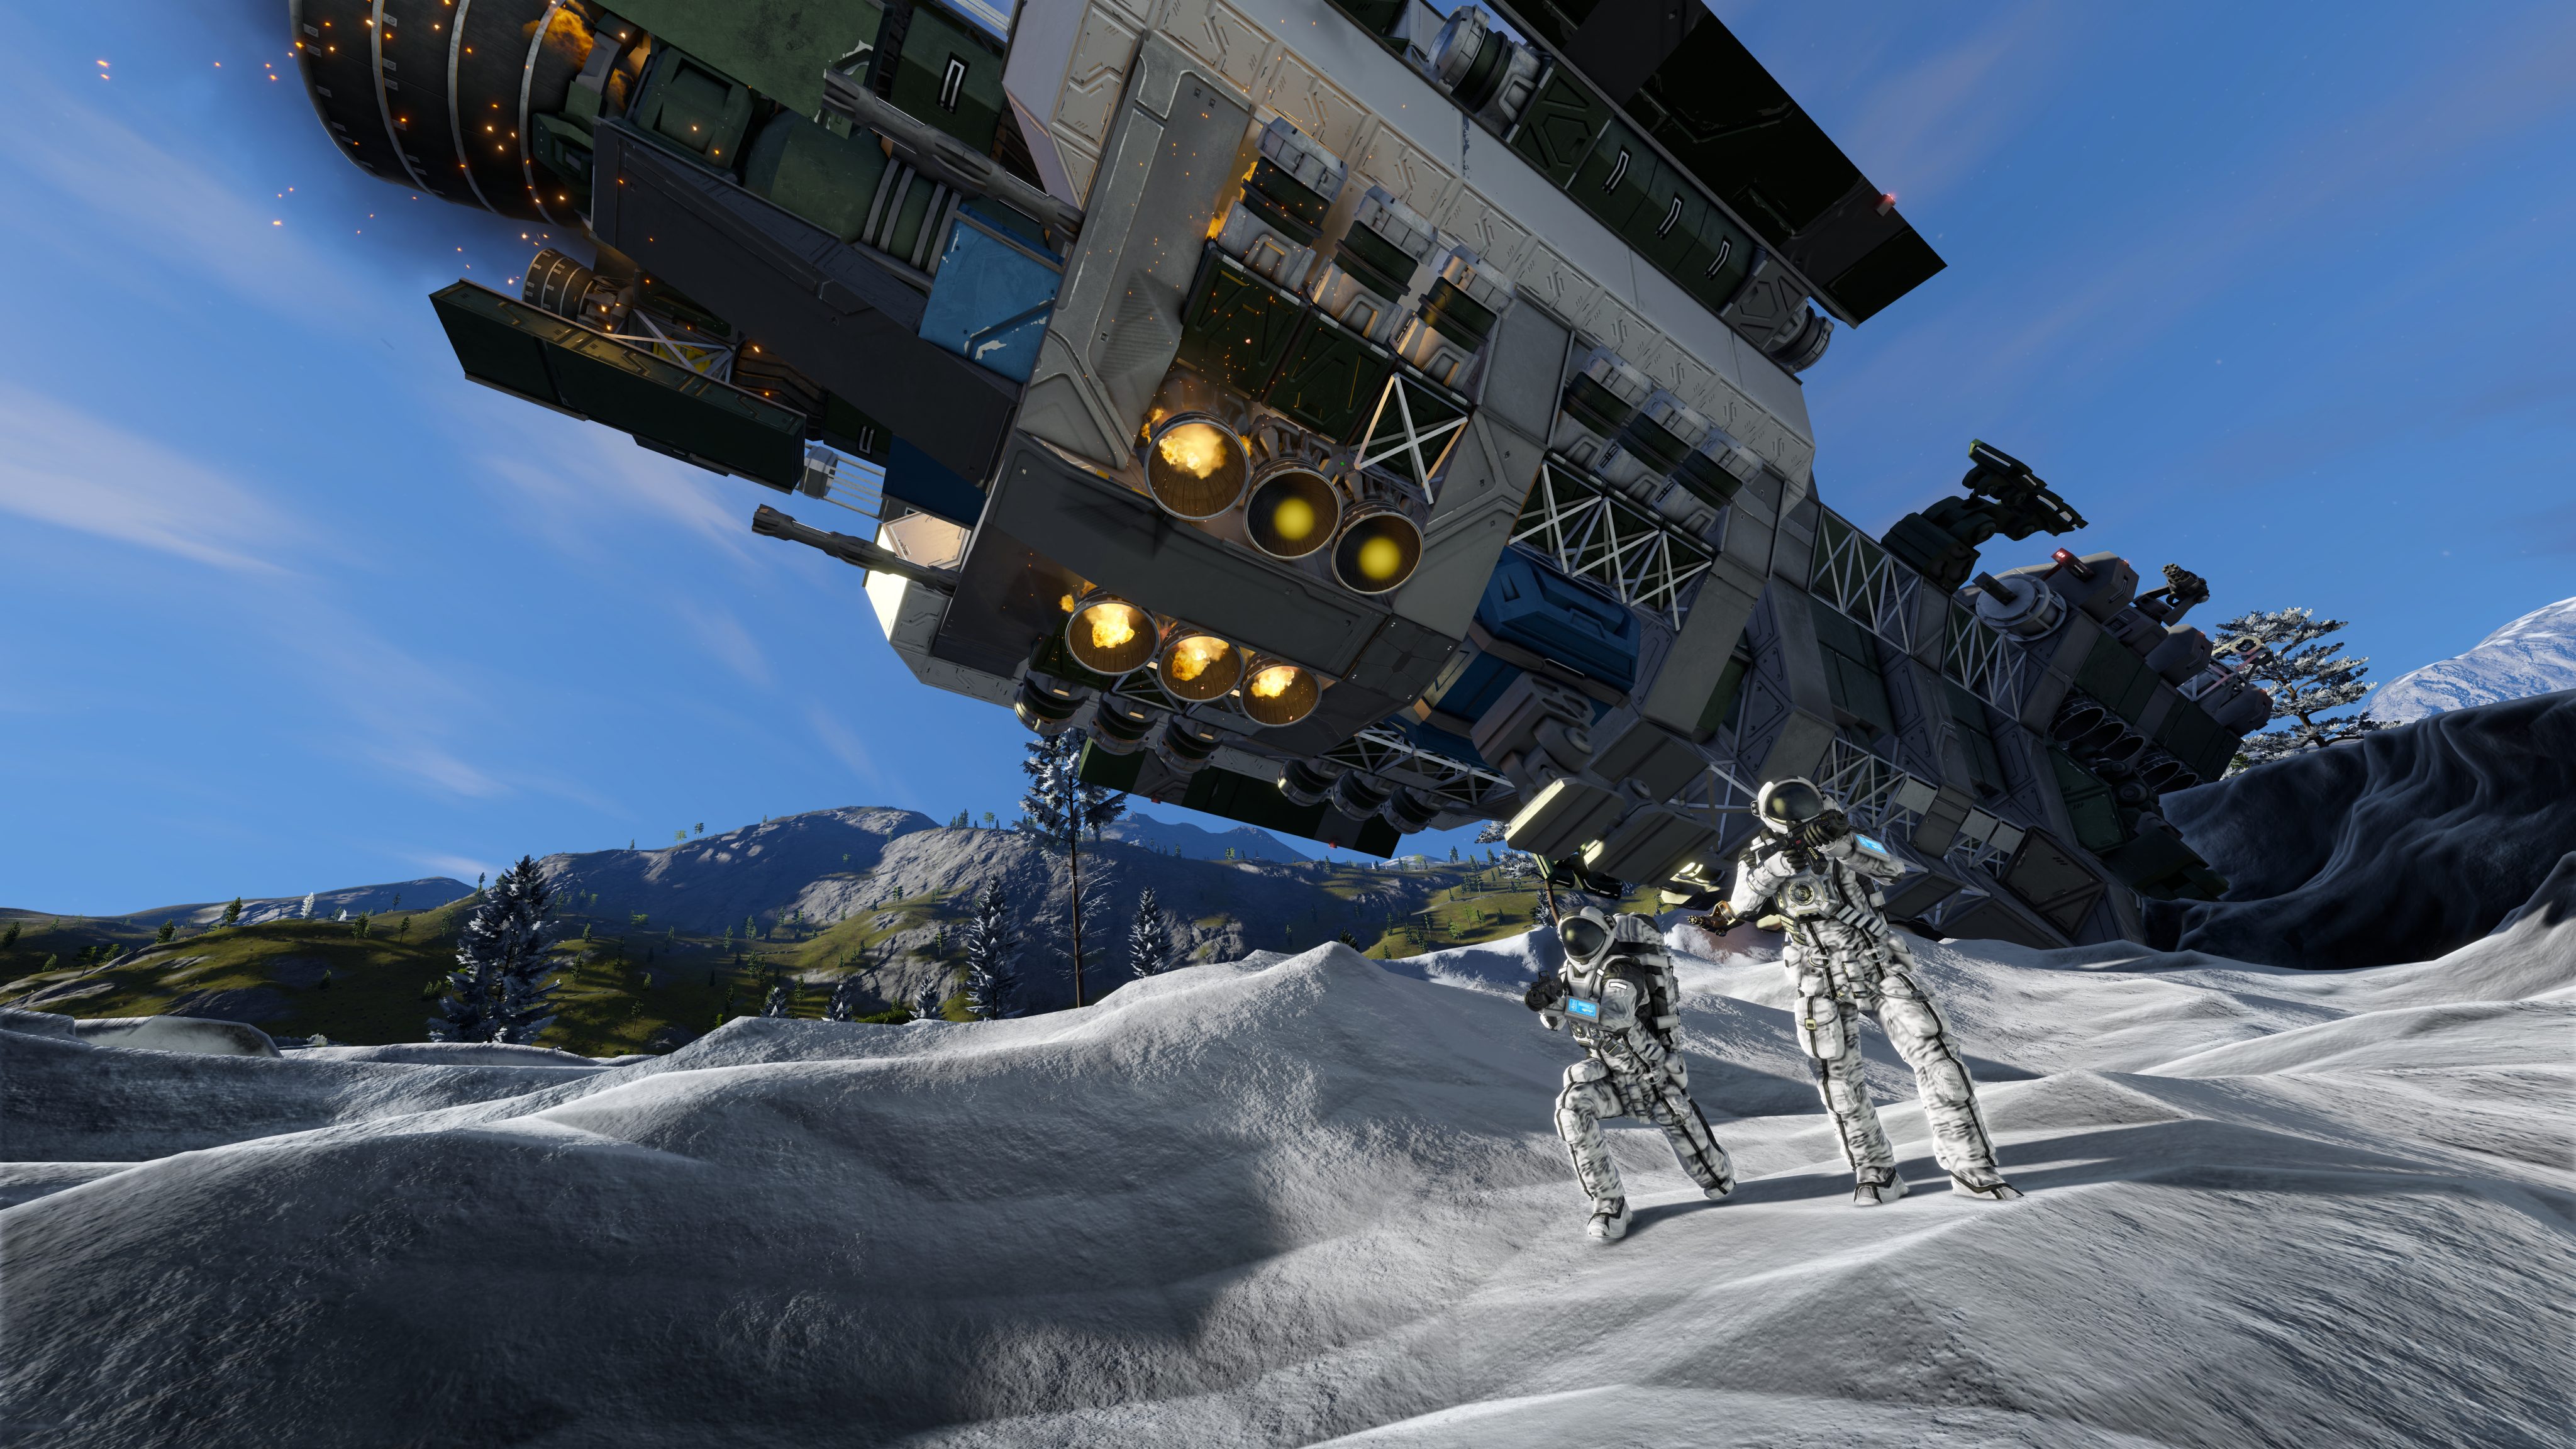 HD desktop wallpaper featuring space engineers next to a futuristic spacecraft on a snowy extraterrestrial landscape, ideal for a sci-fi themed background.